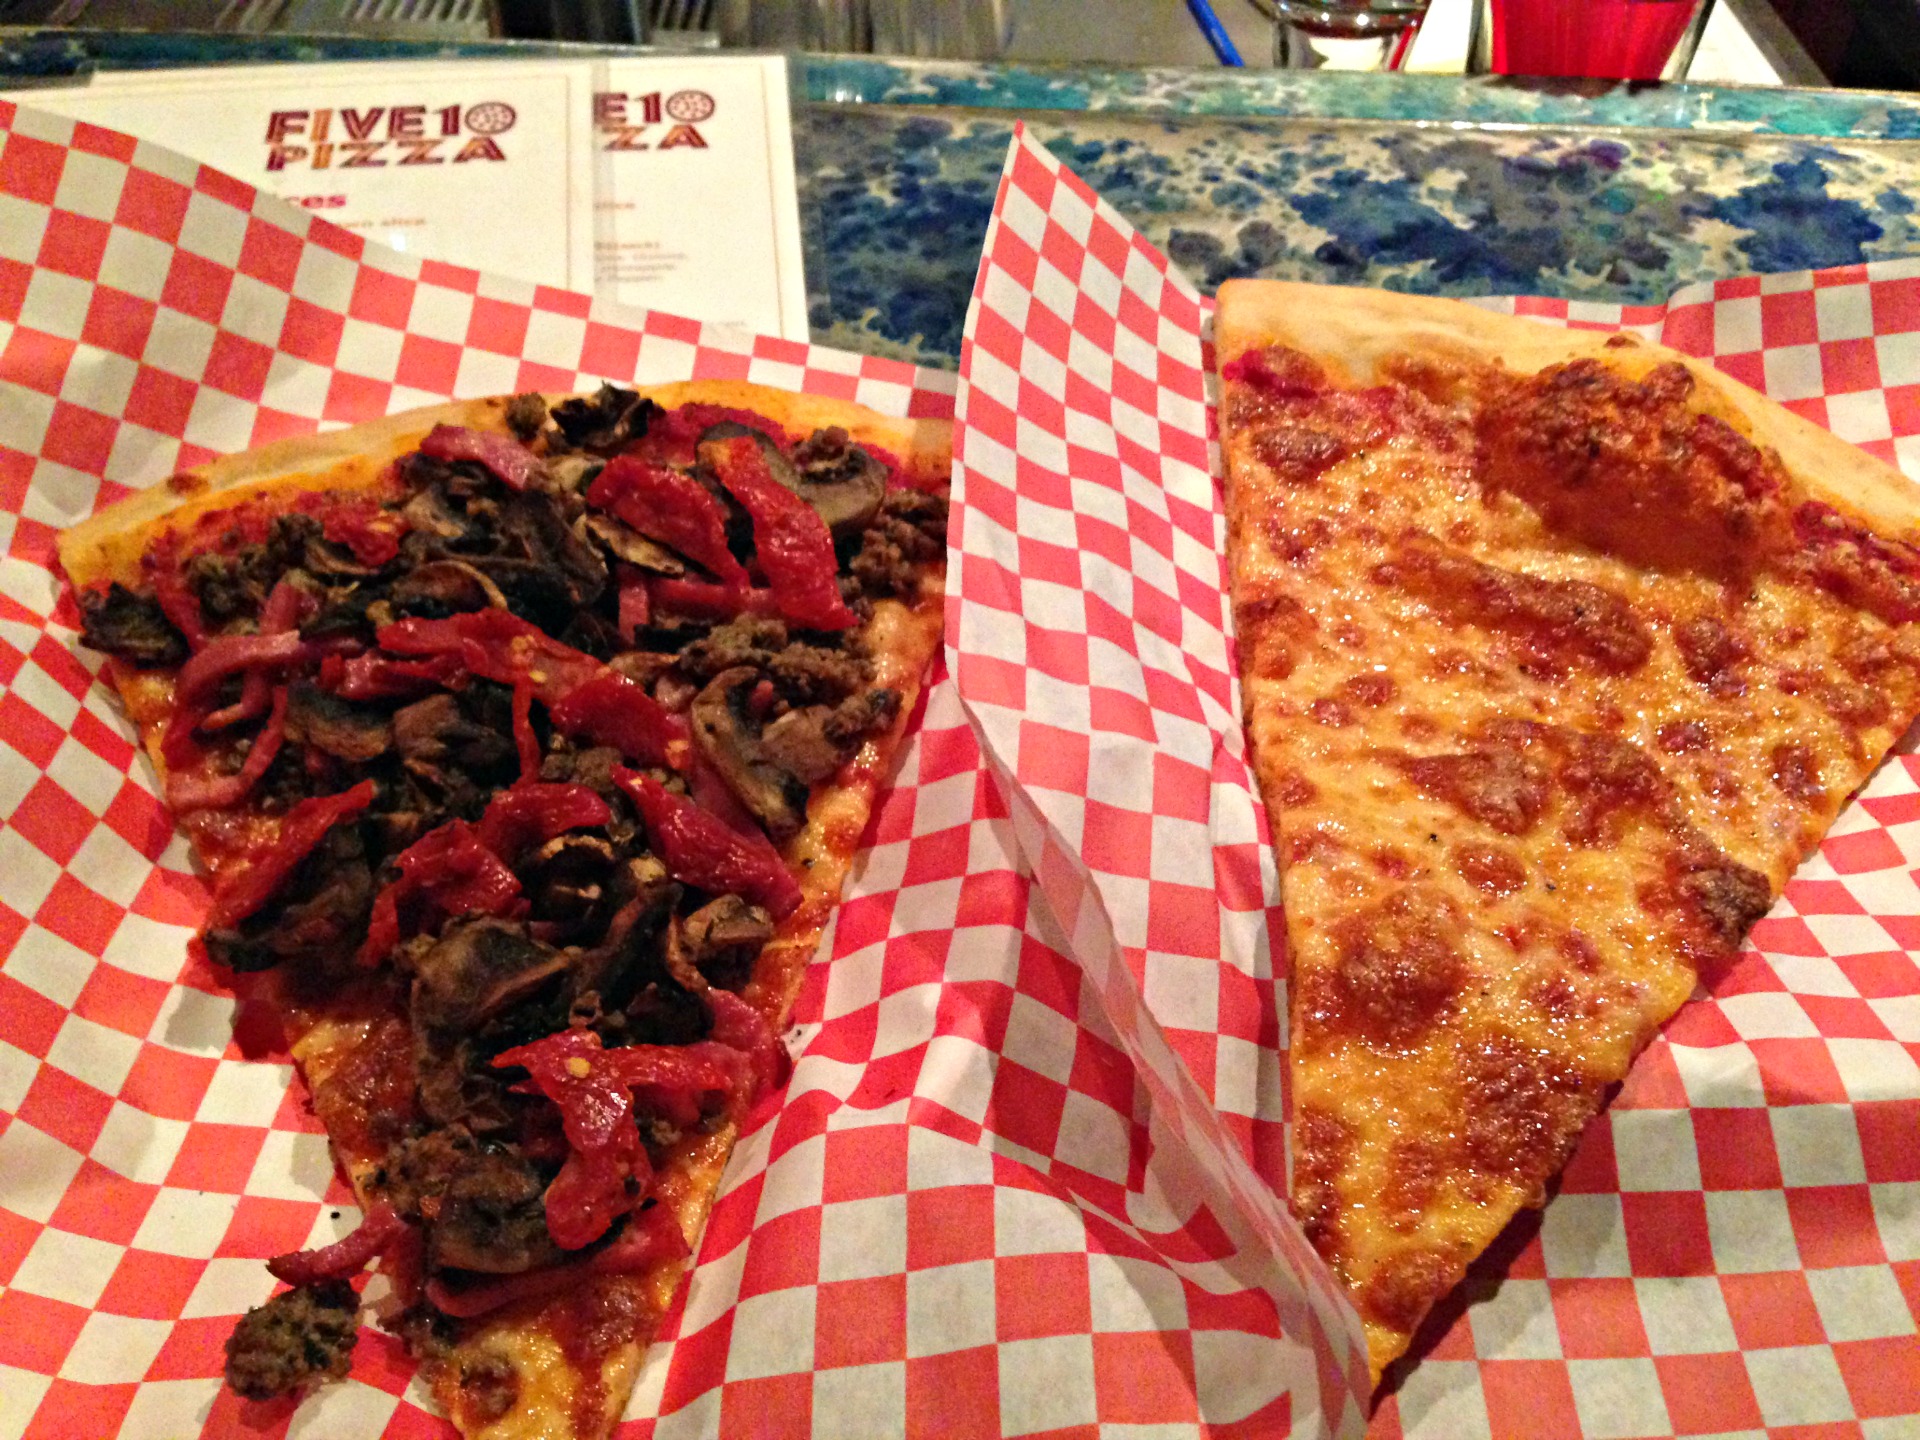 A slice of the namesake special and a slice of cheese from Oakland's Five10 Pizza.